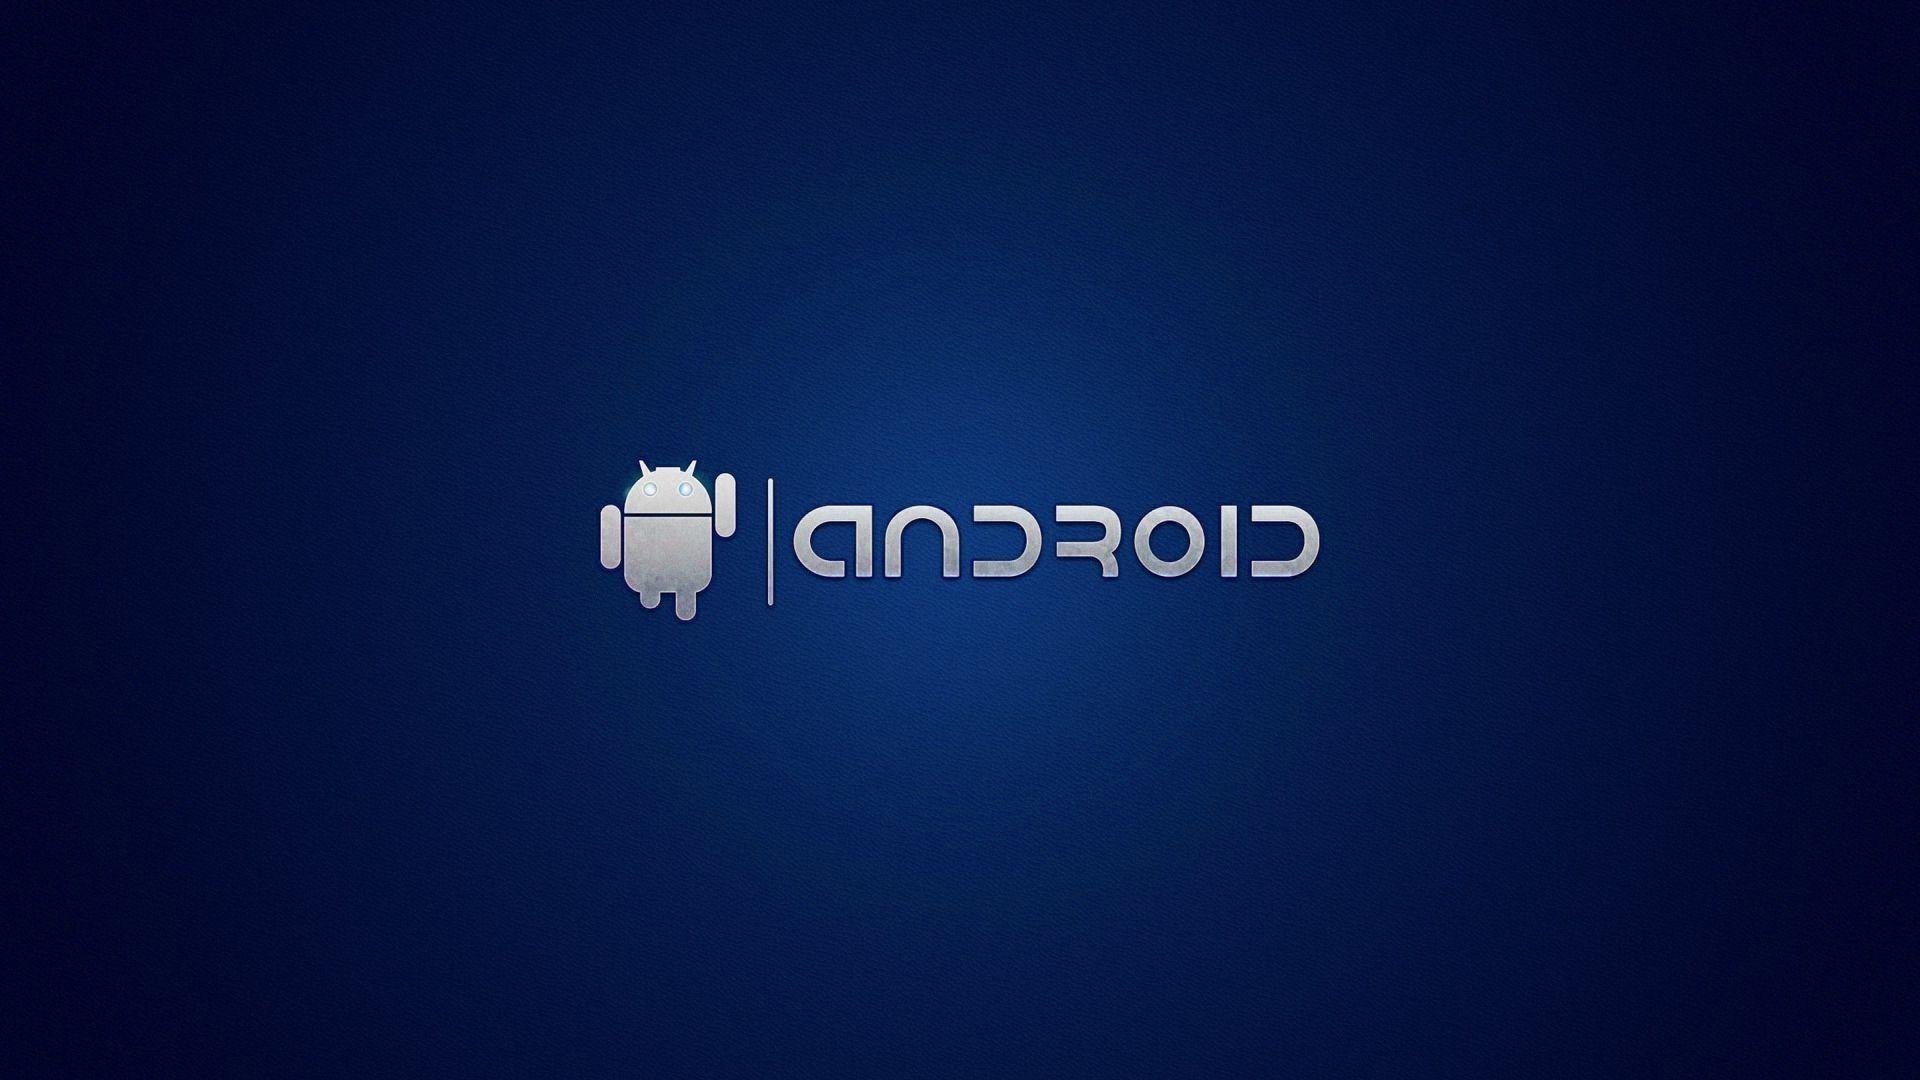 Blue and Silver Logo - Android silver logo on blue background